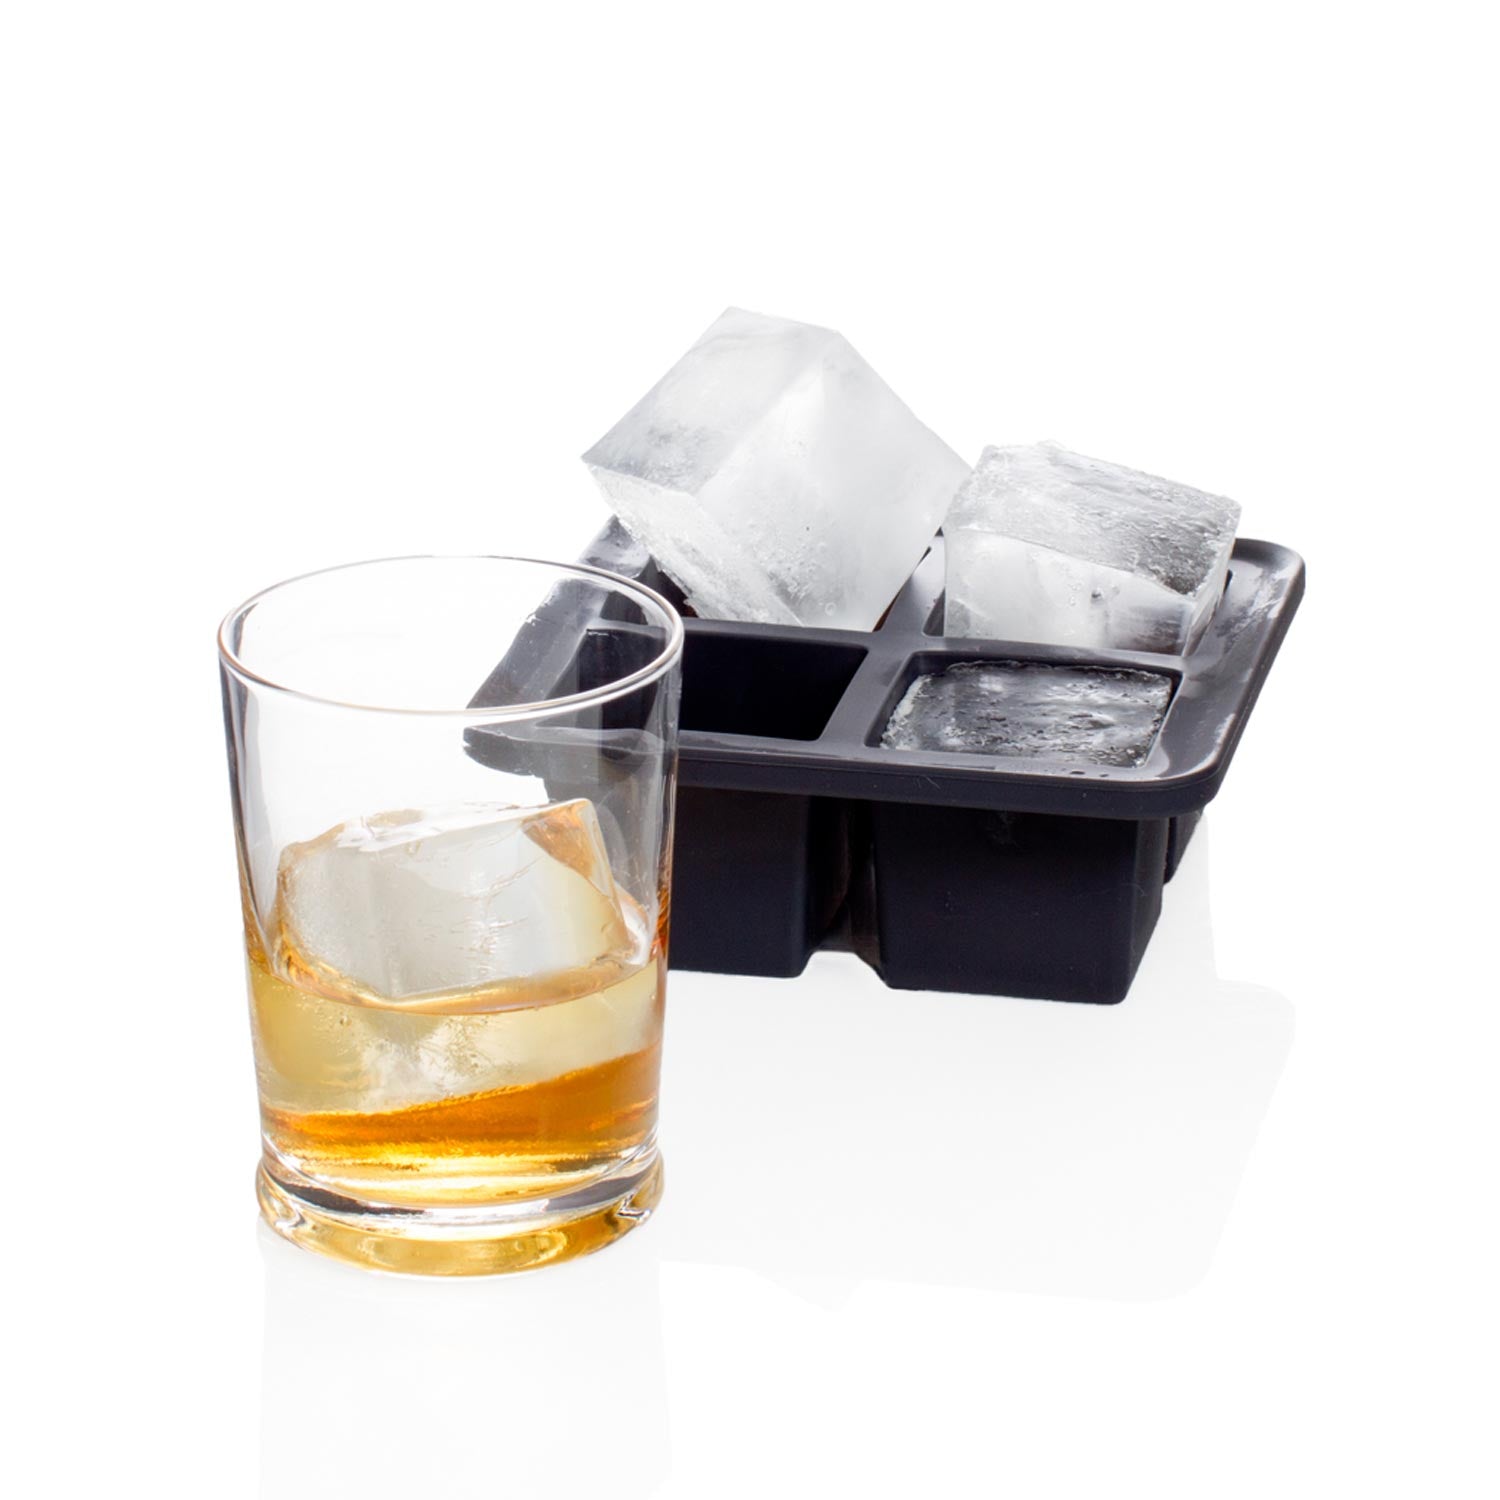 Super large silicone ice tray with lid